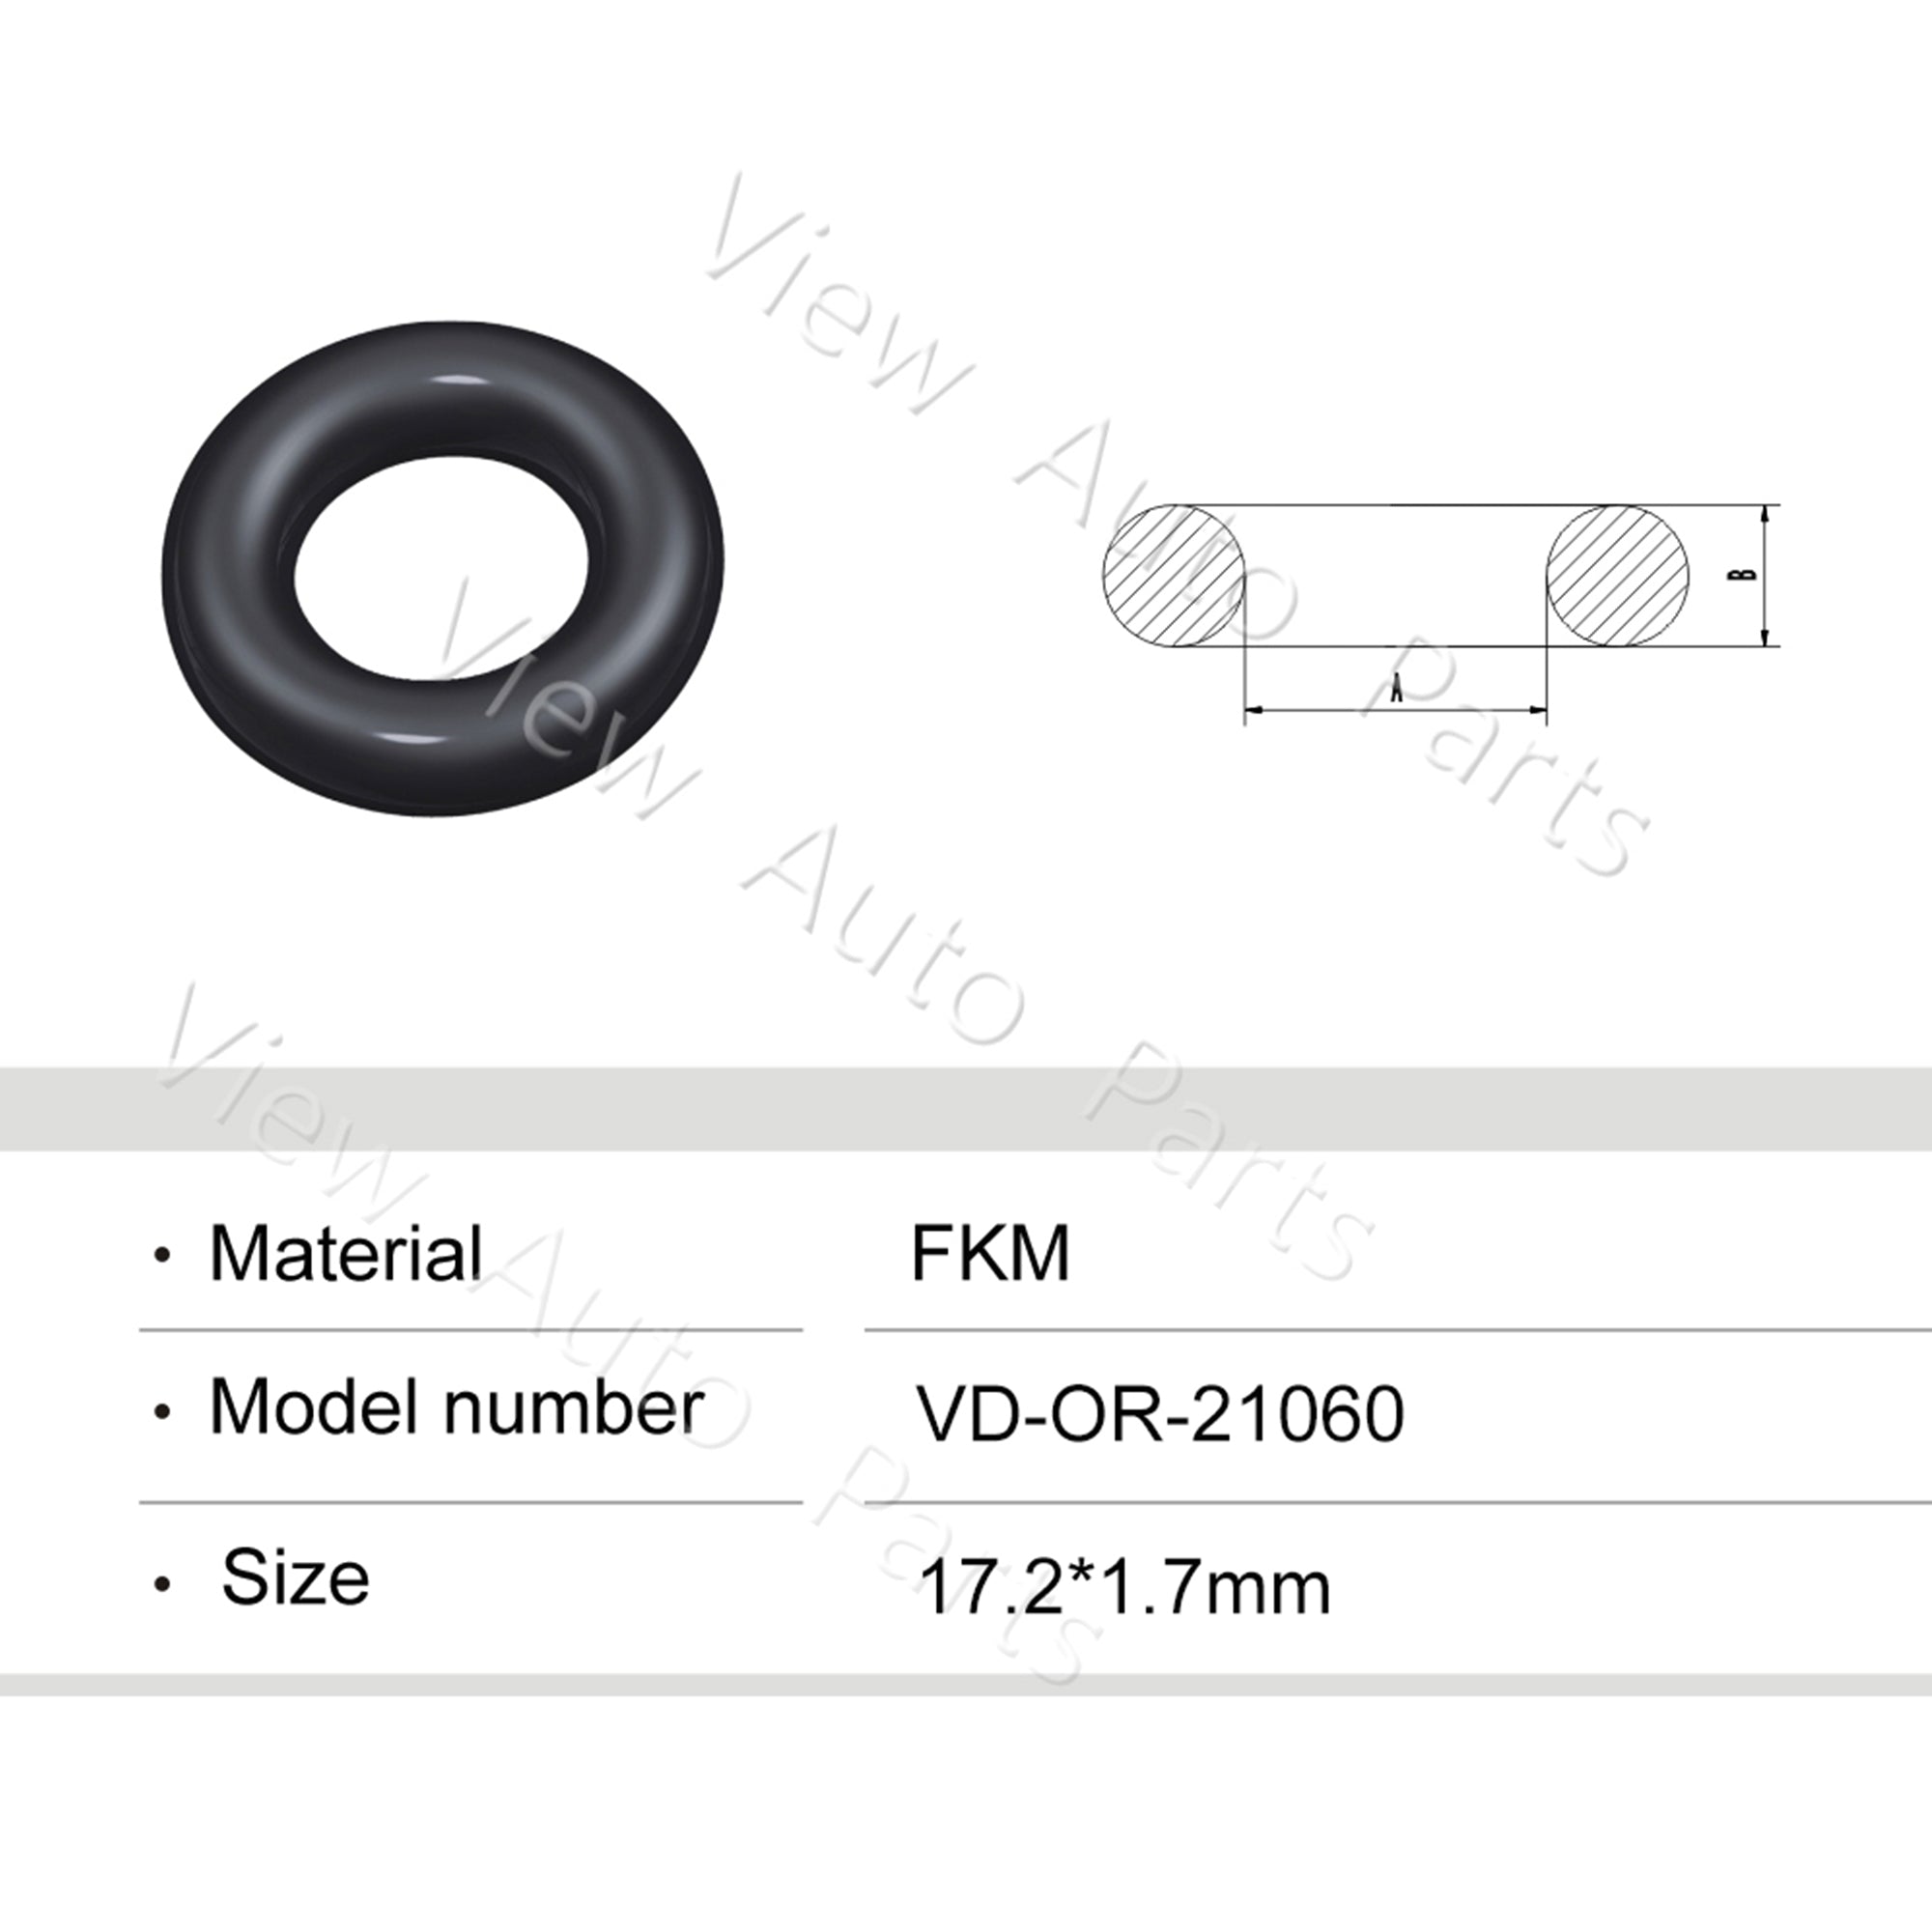 Fuel Injector Rubber Seal Orings for Fuel Injector Repair Kits FKM & Rubber Heat Resistant, Size: 17.2*1.7mm OR-21060